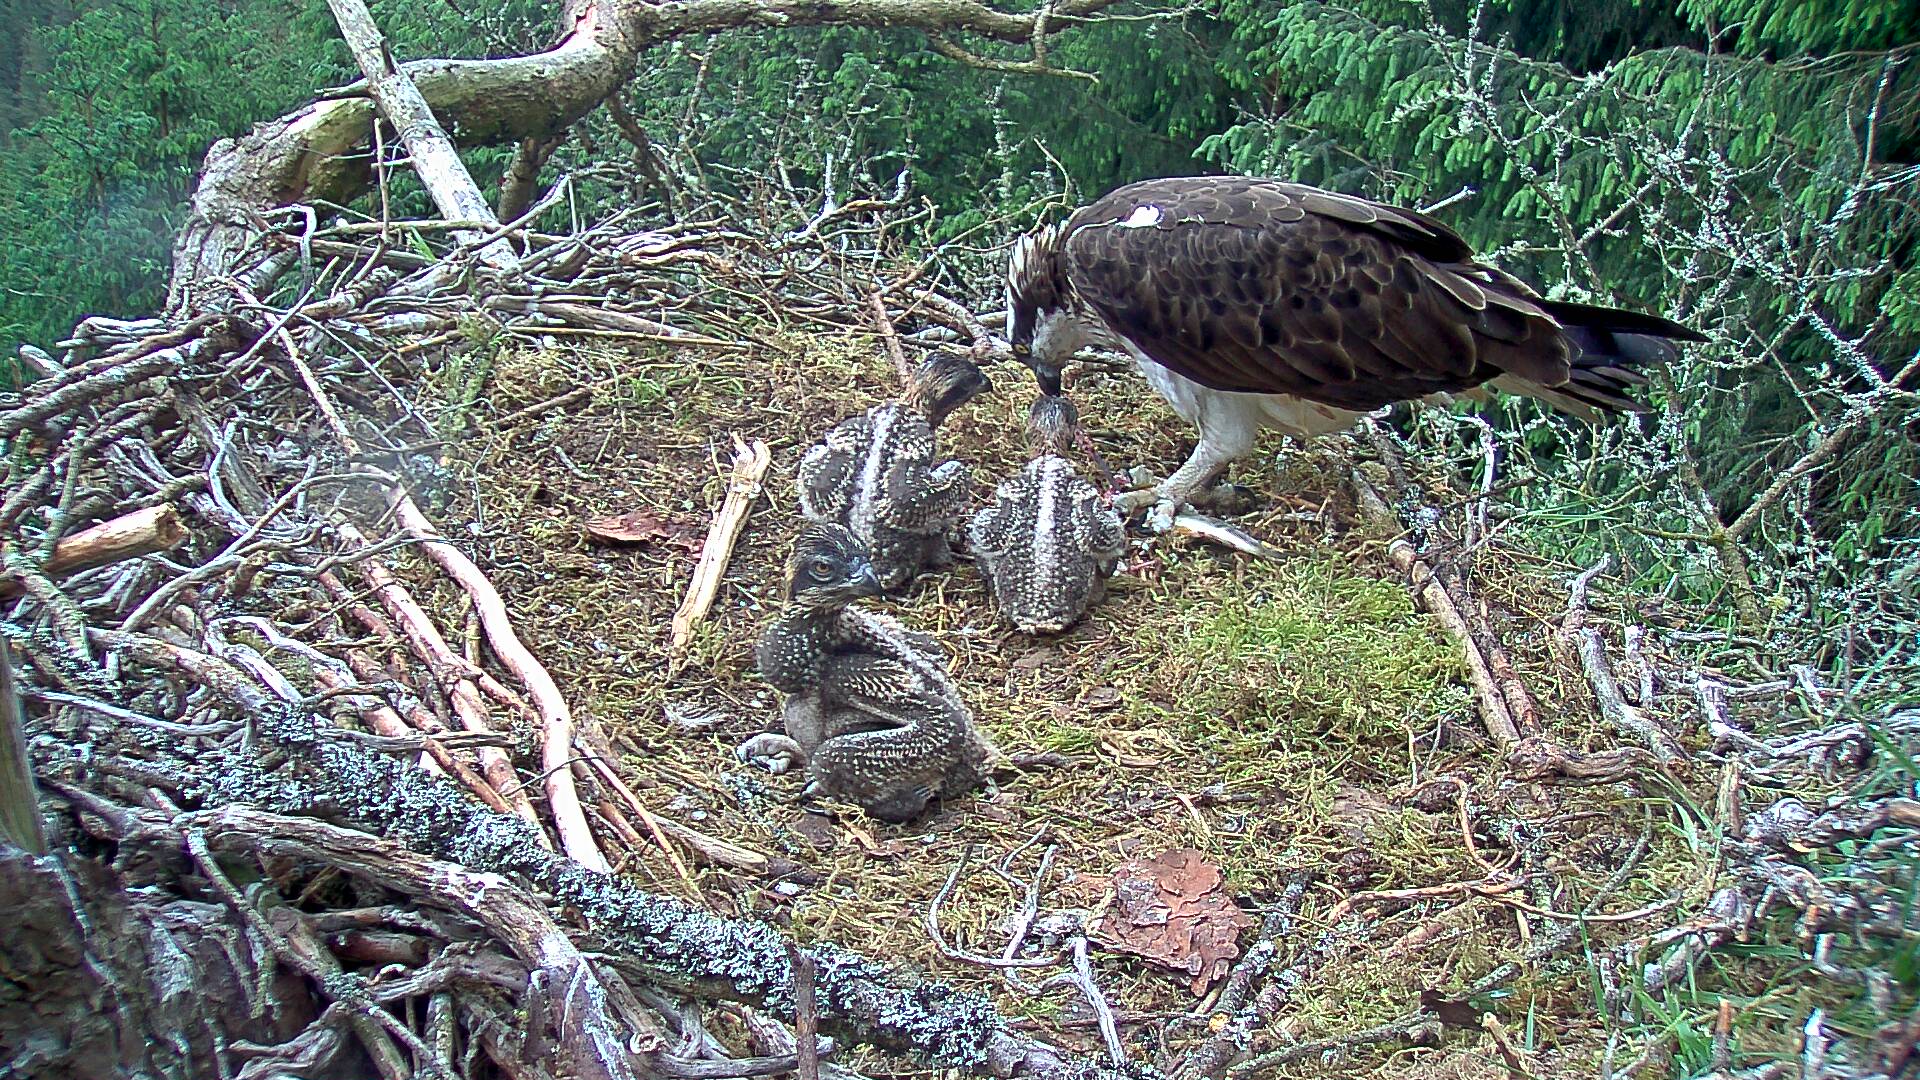 Adult oyster feeding chicks in the nest